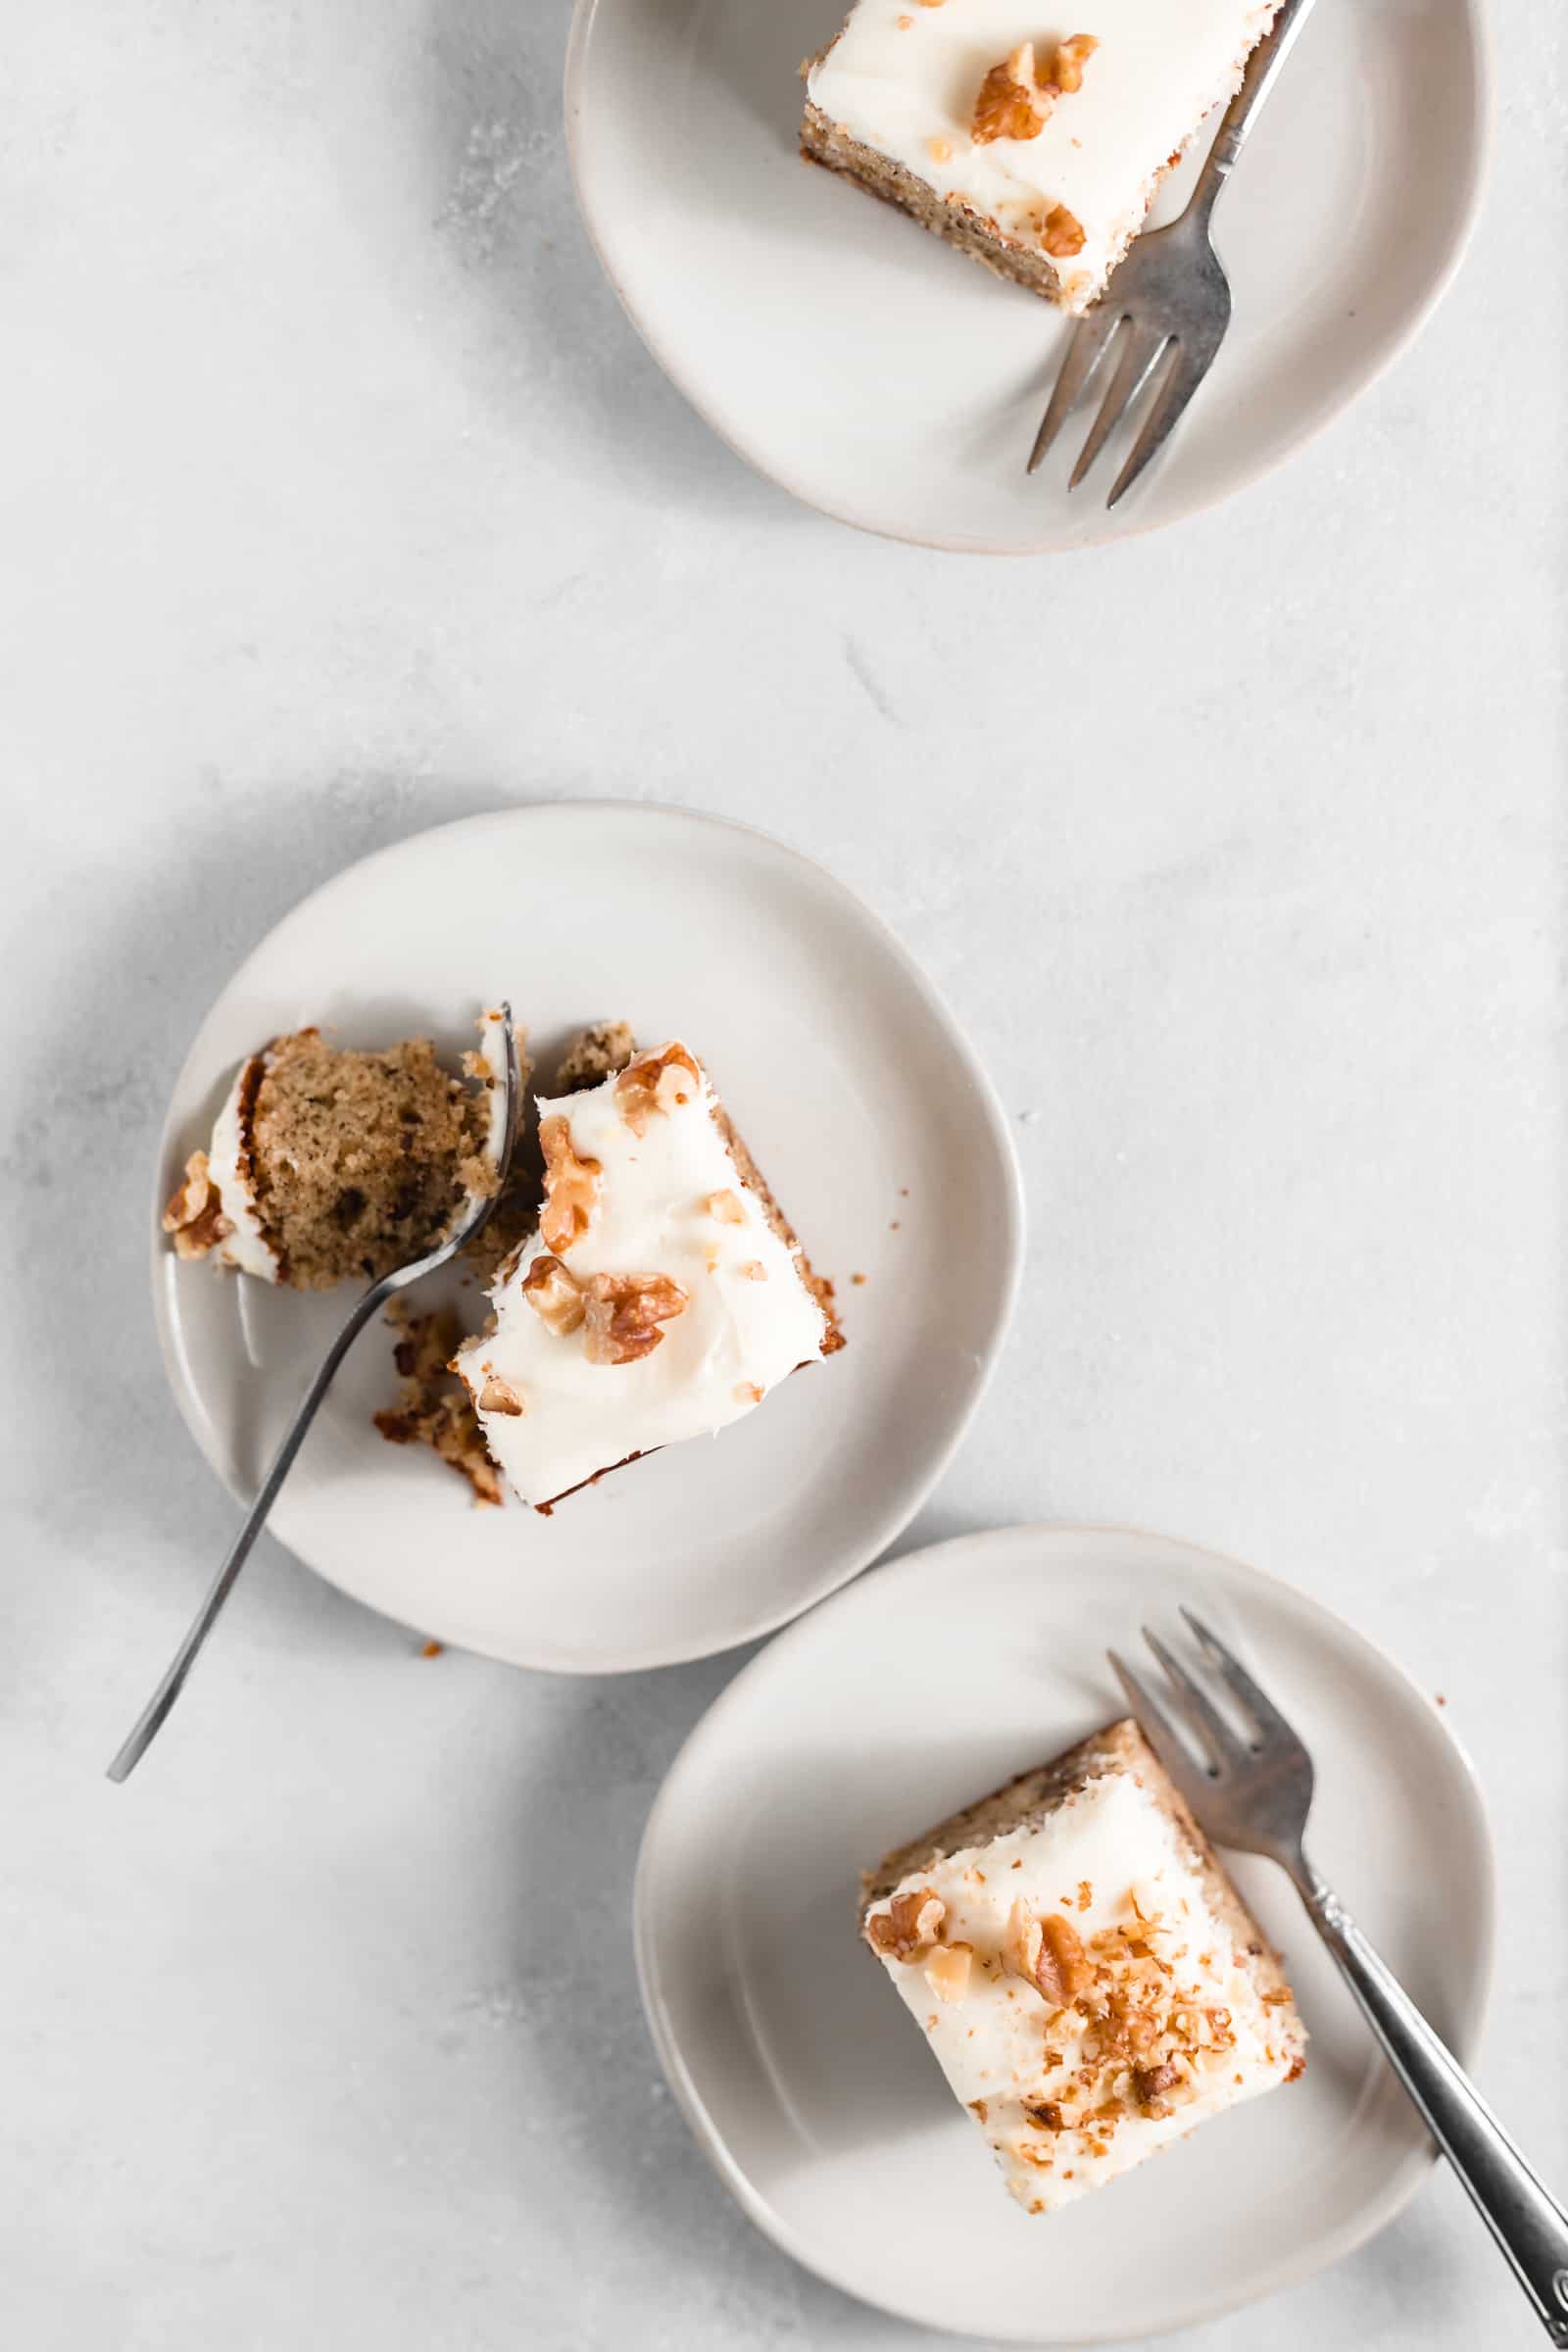 The Best Banana Walnut Cake with Cream Cheese Frosting